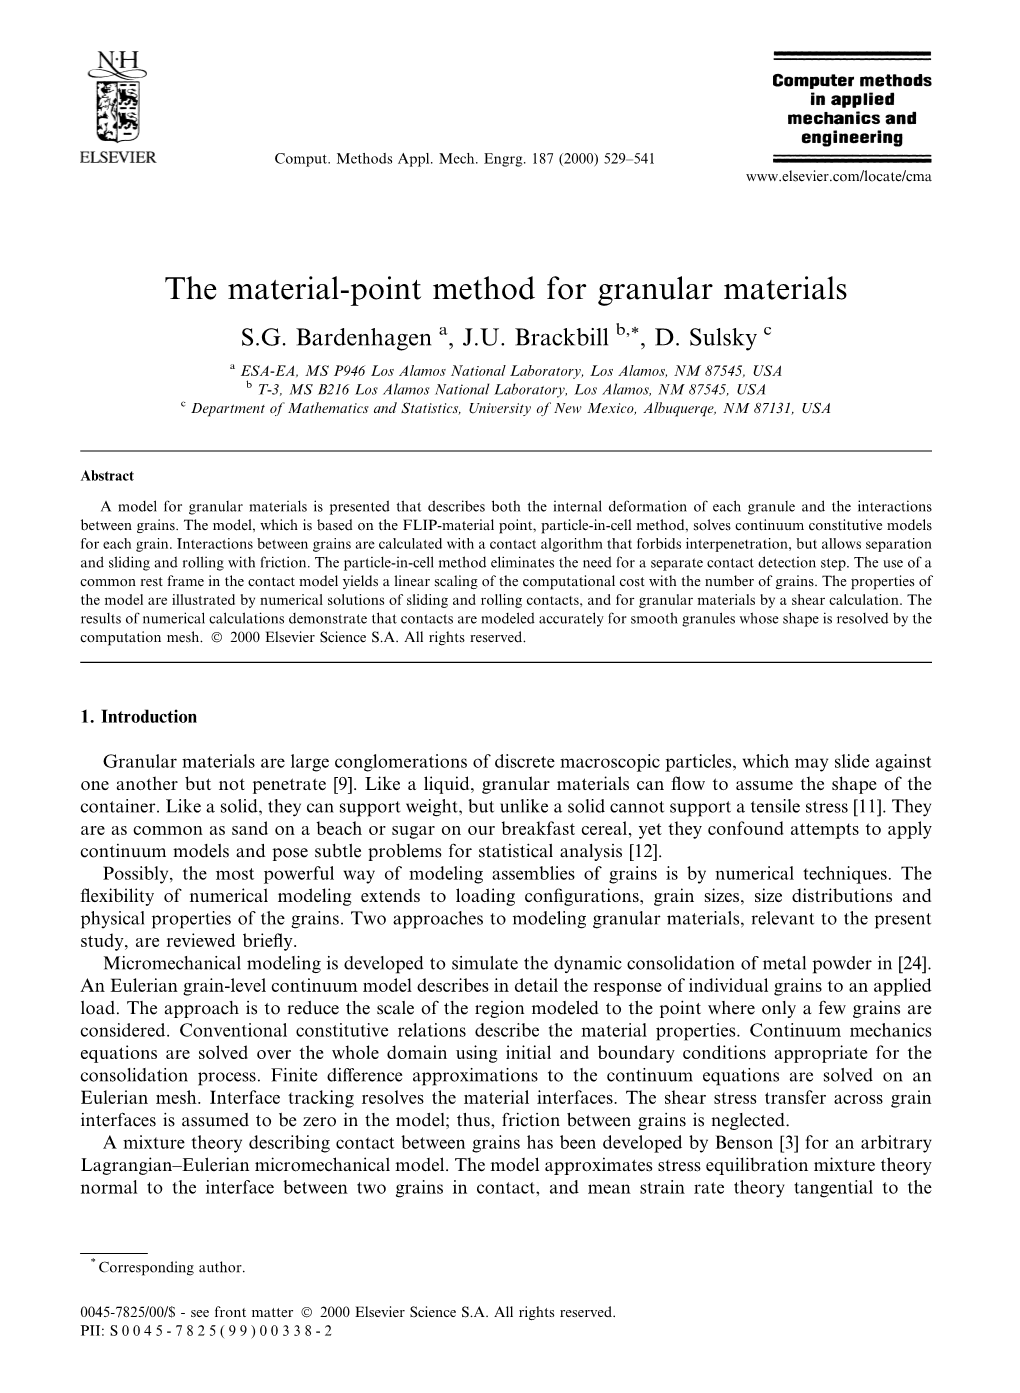 The Material-Point Method for Granular Materials